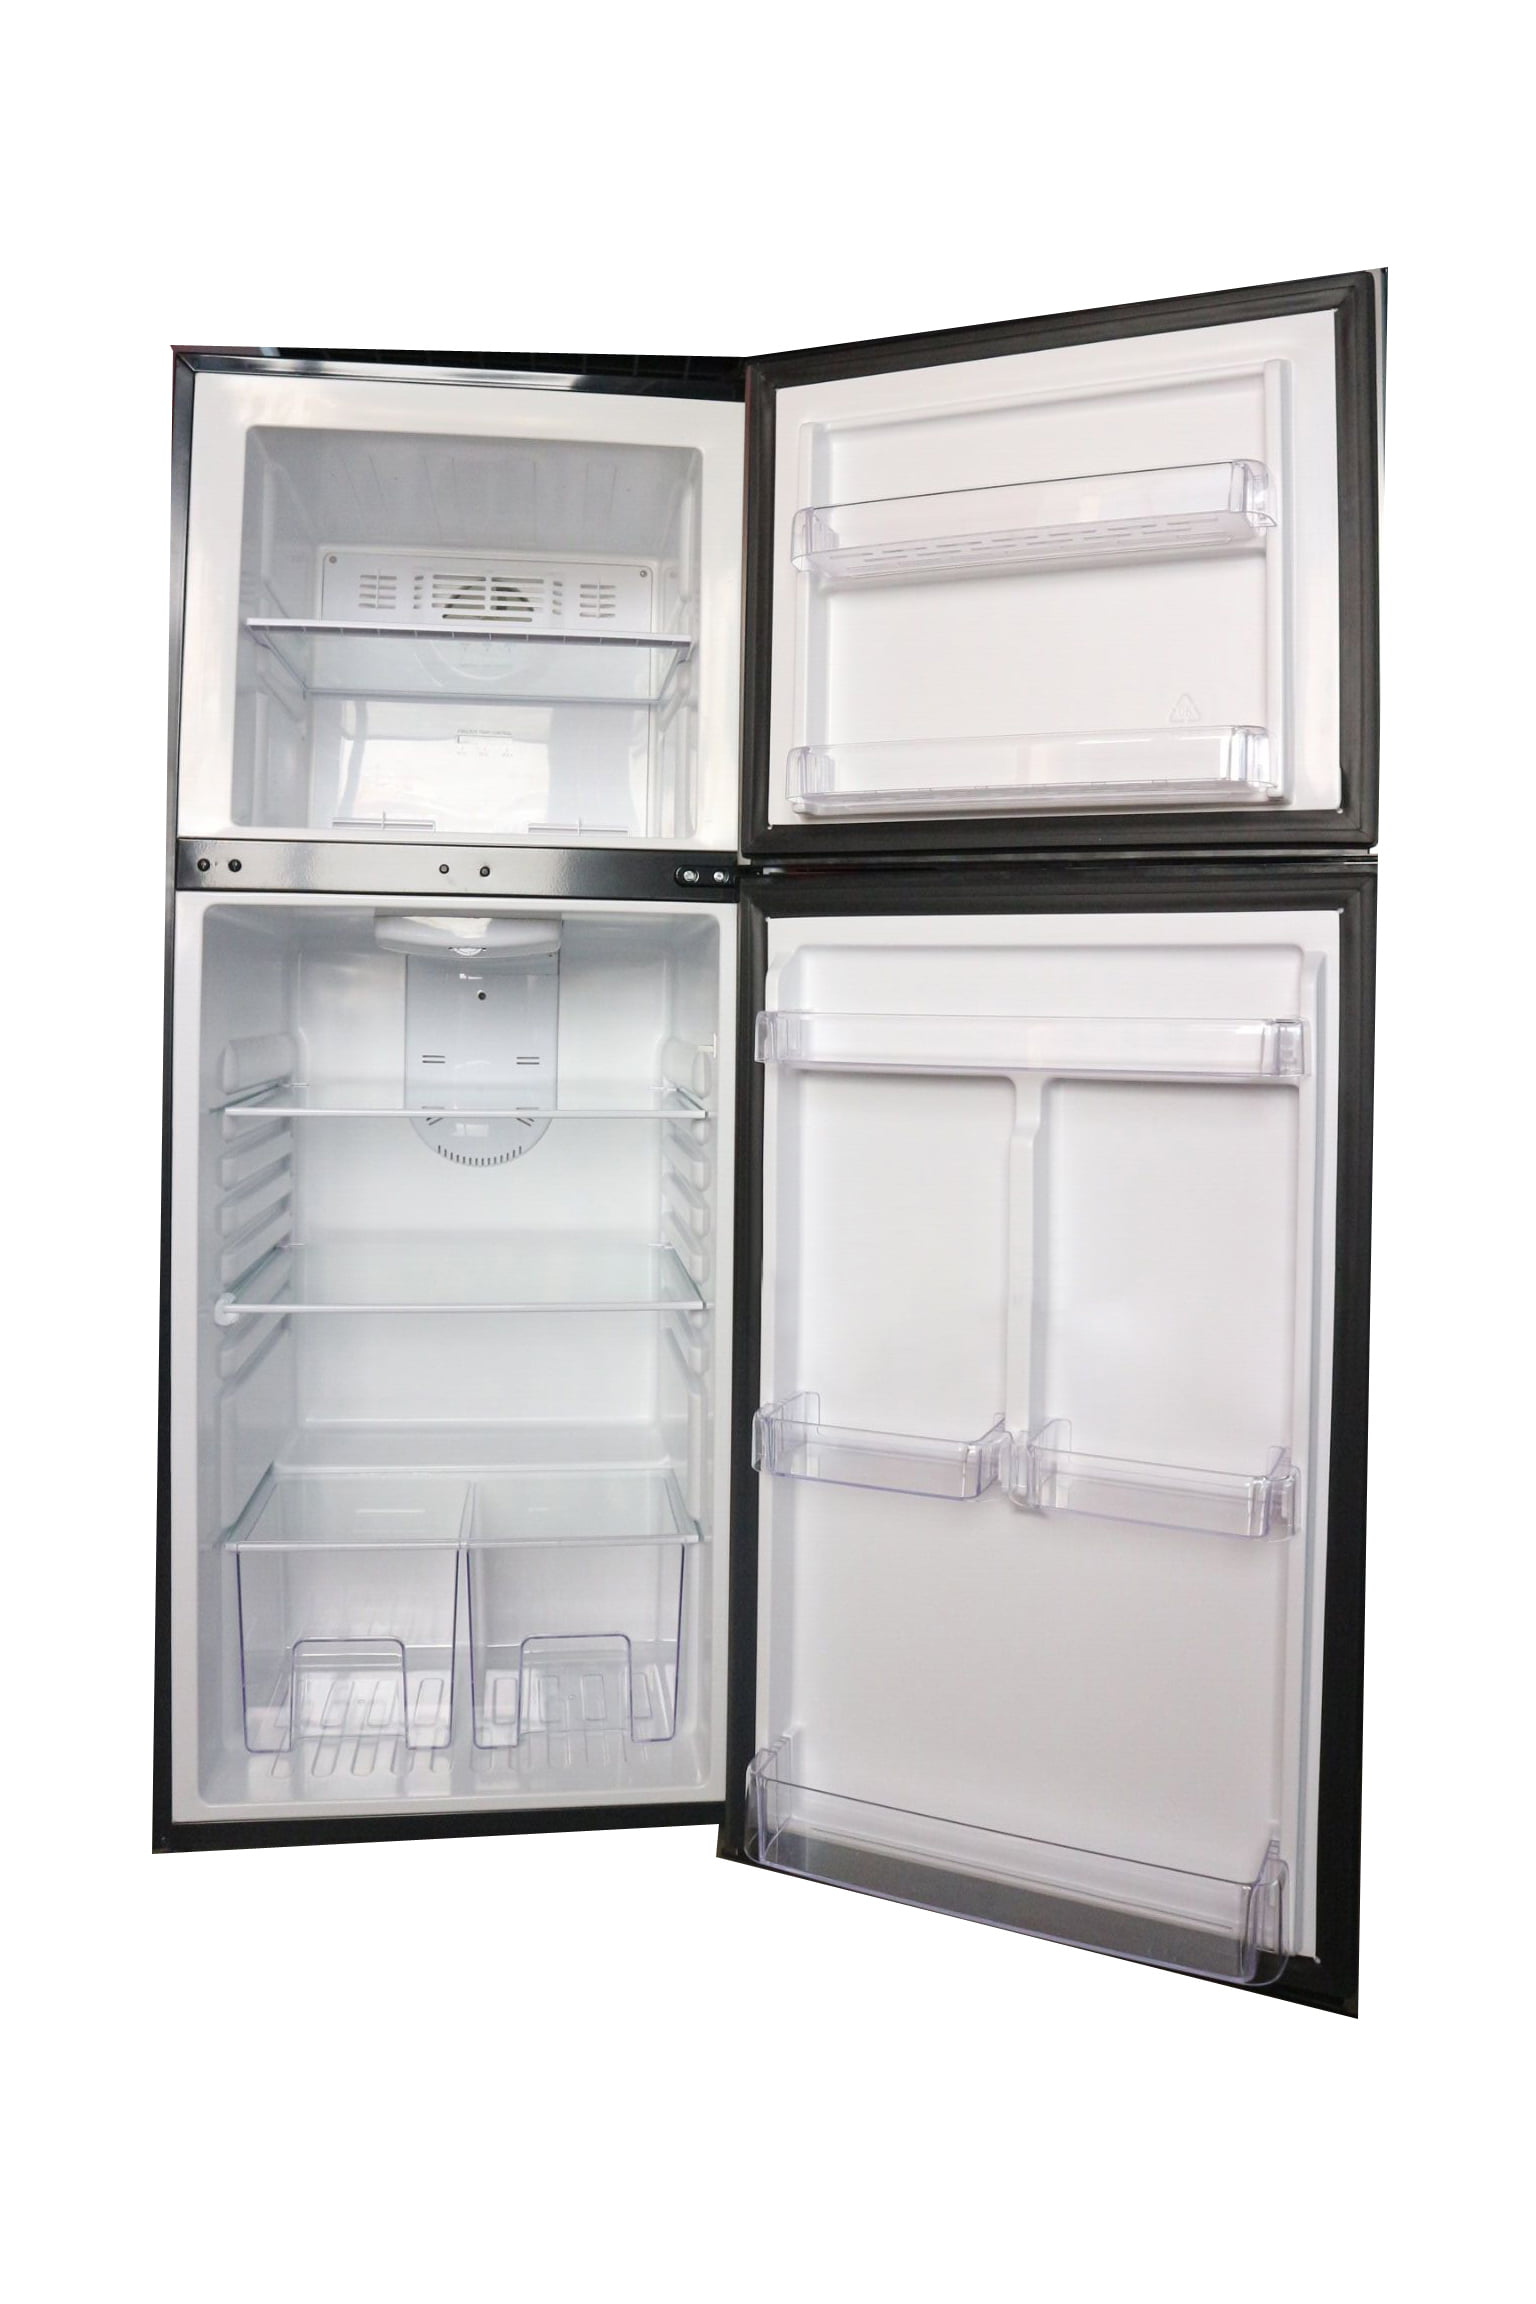 RCA RFR1207 Top Freezer Apartment Size Refrigerator Silver 12 cu ft Stainless 